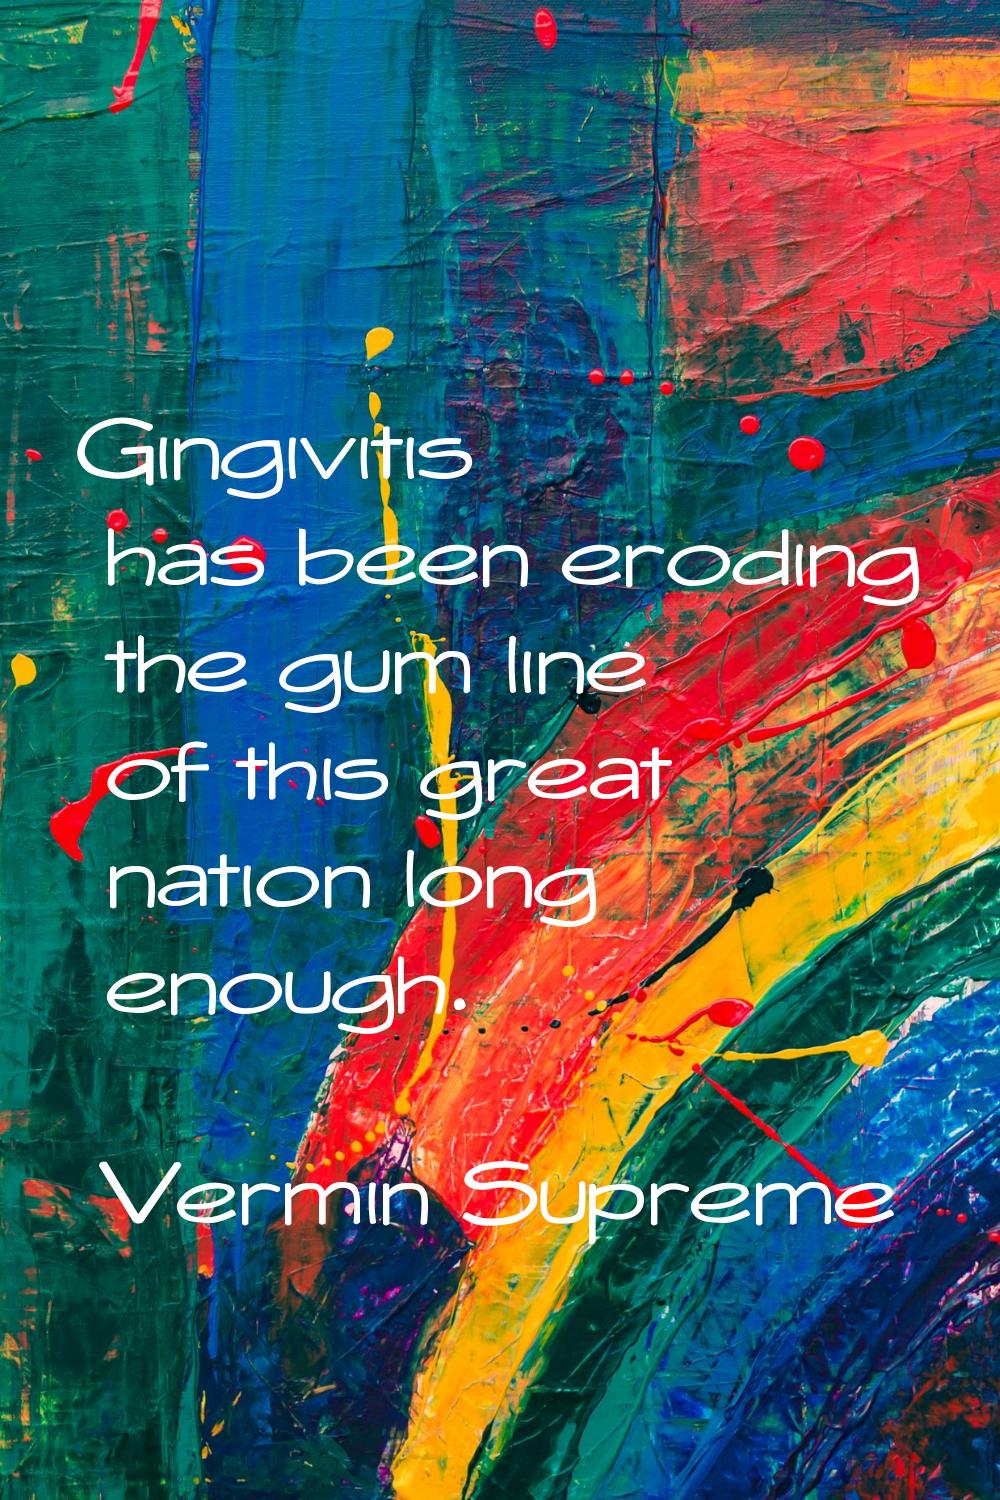 Gingivitis has been eroding the gum line of this great nation long enough.